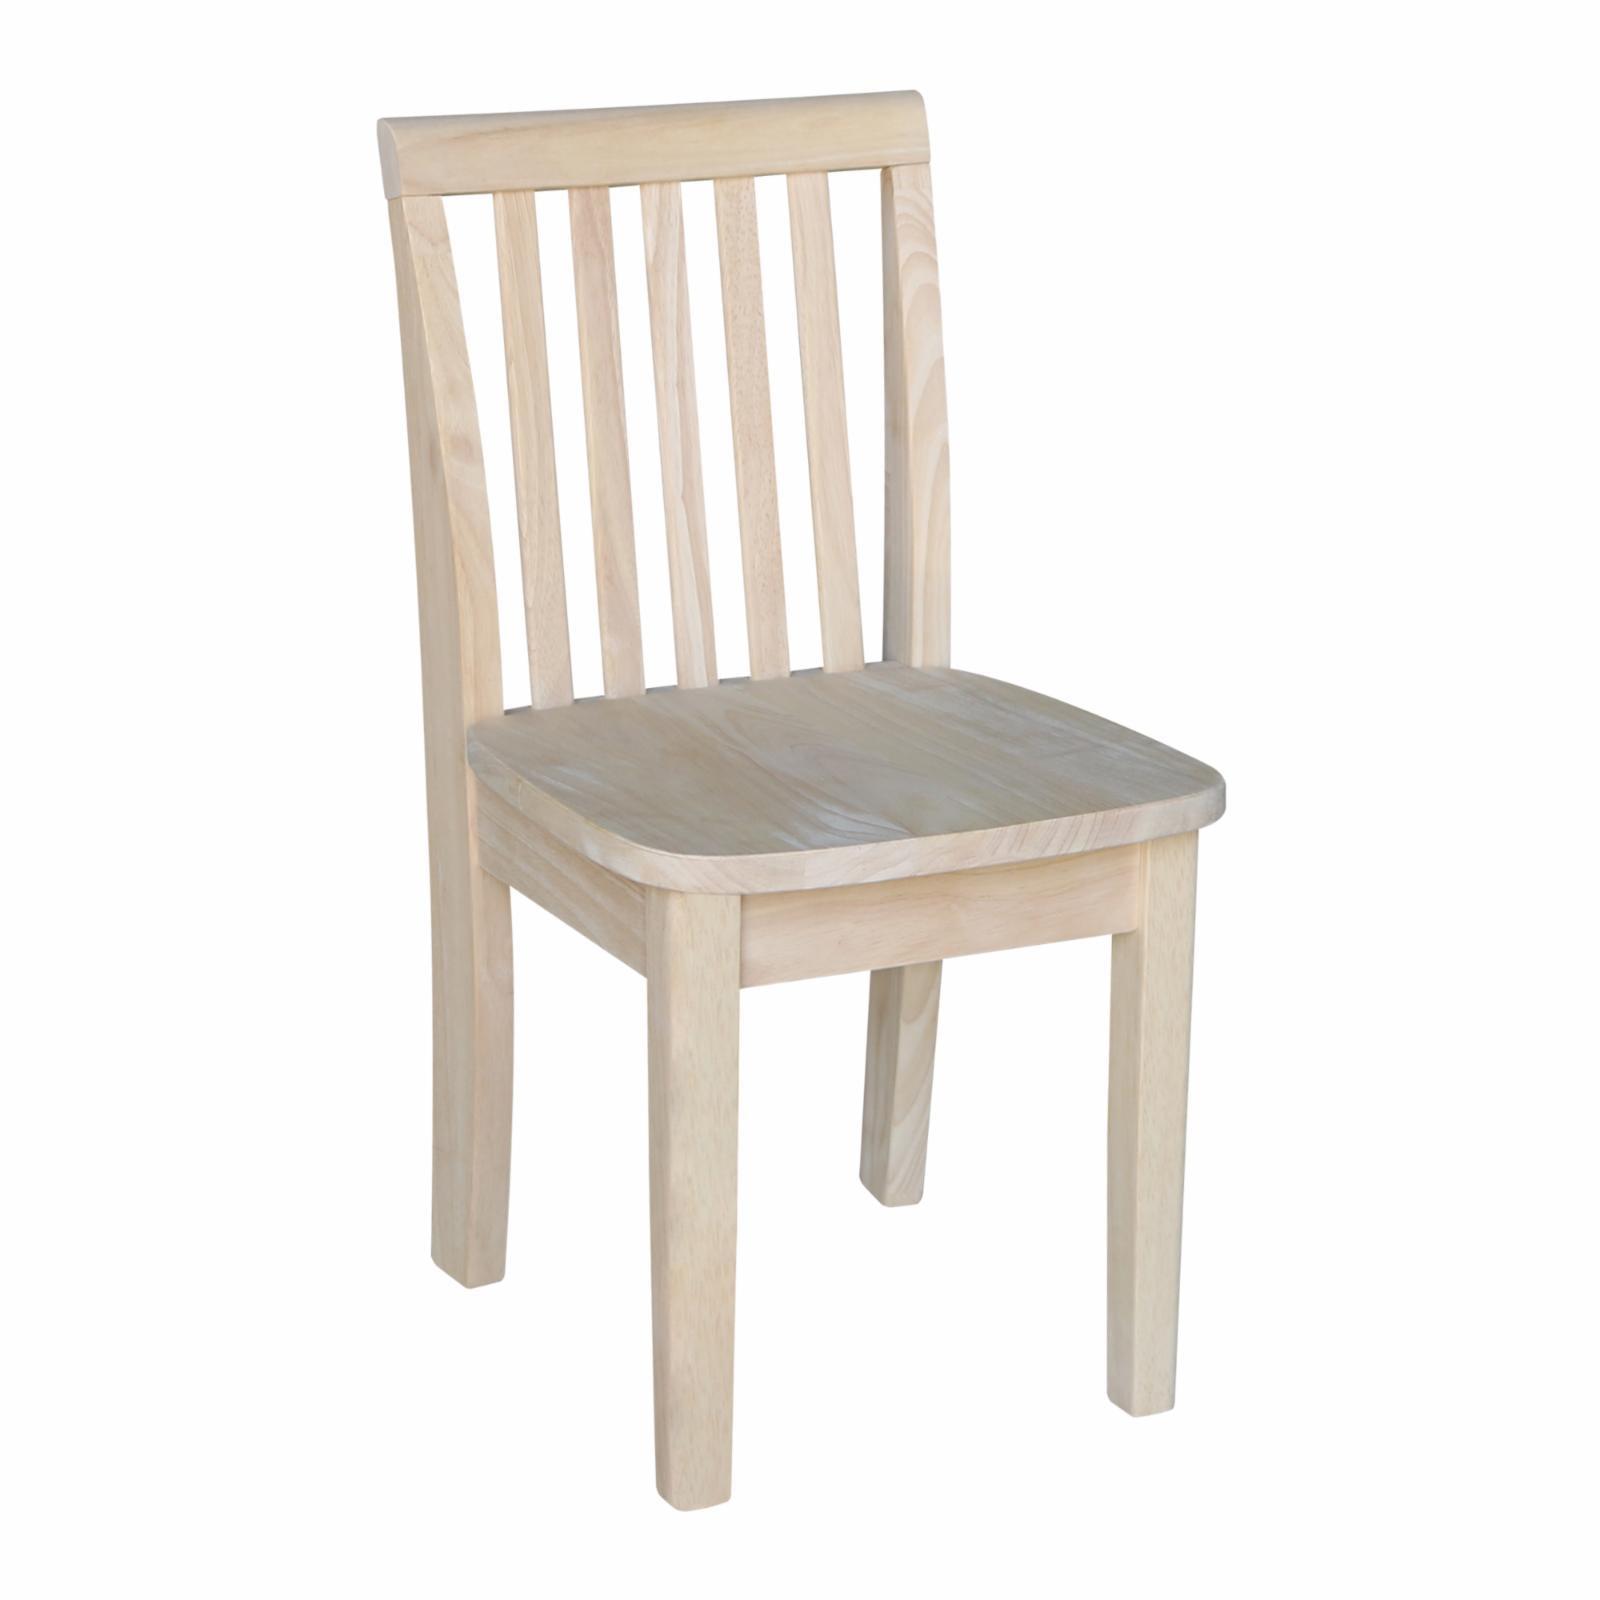 Eco-Friendly Traditional Parawood Mission Kids' Chairs, Unfinished - Set of 2